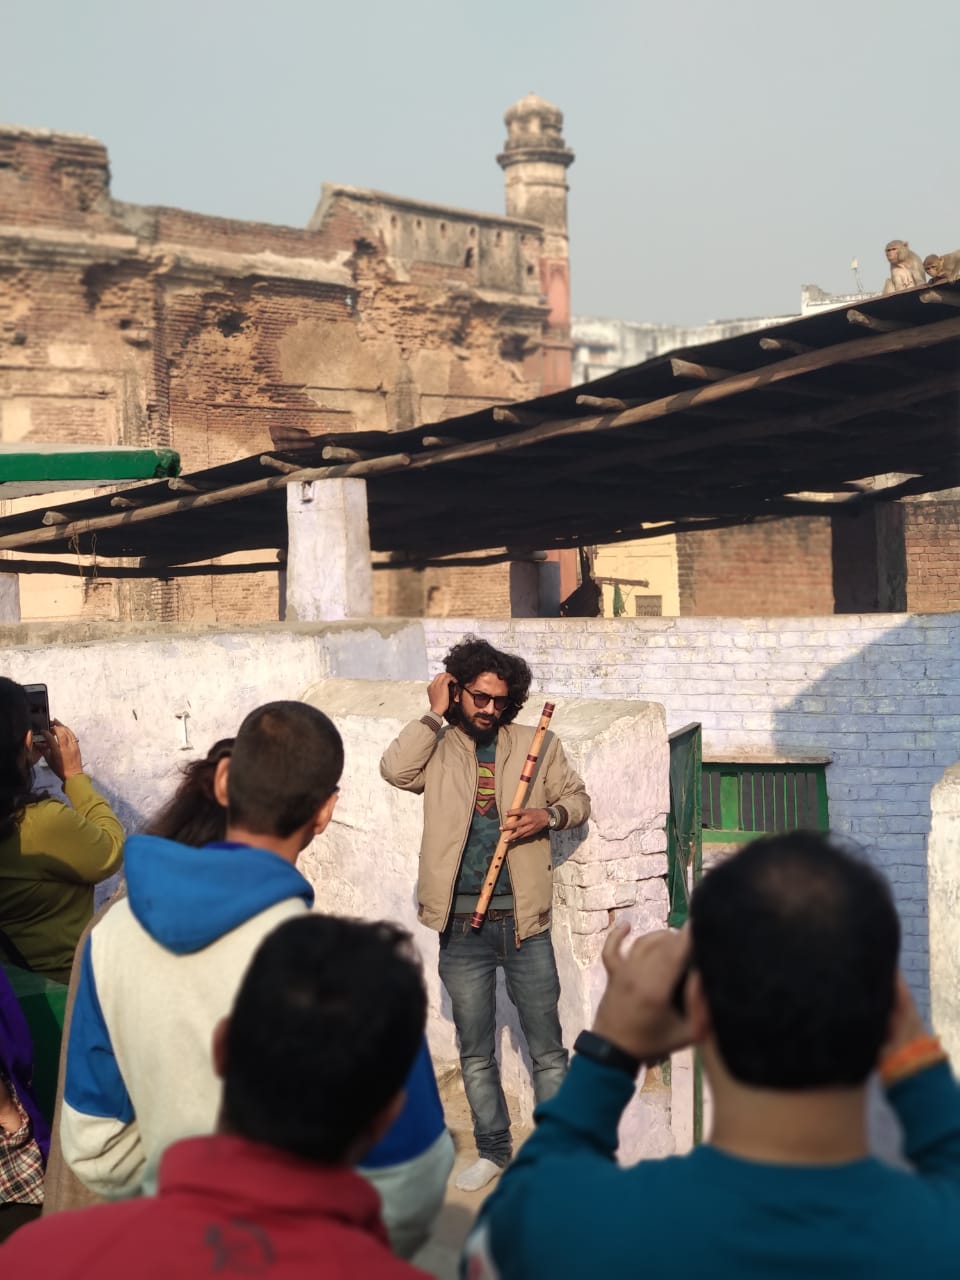 Anal Jha during one of his heritage walks through Agra